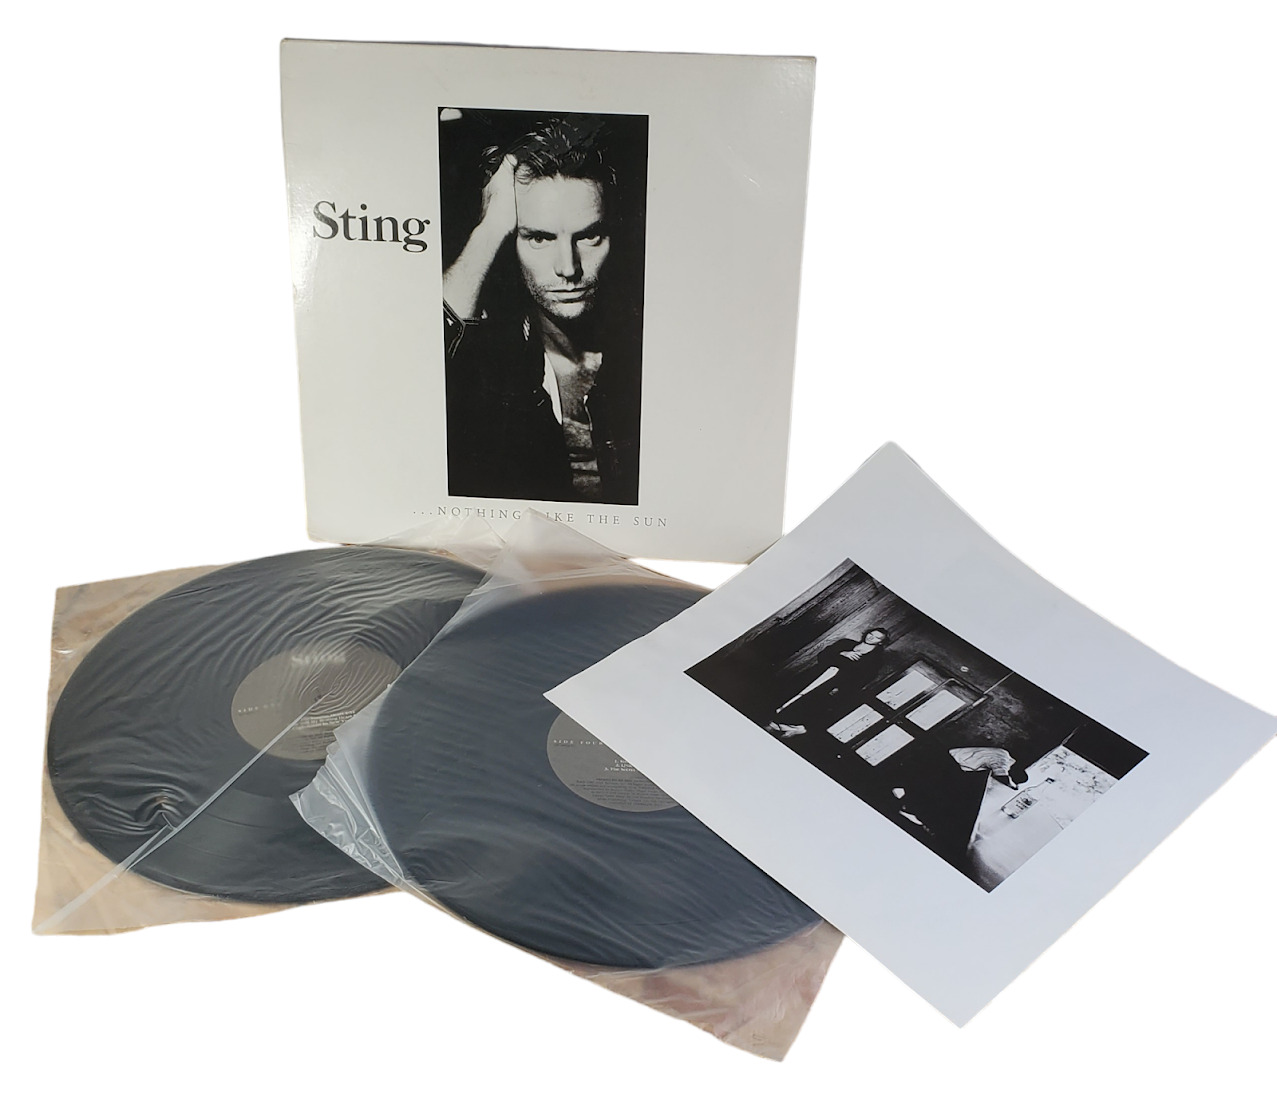 STING Nothing Like The Sun 2LPs 1987 A&M SP-6402 Never Played Mint Condition